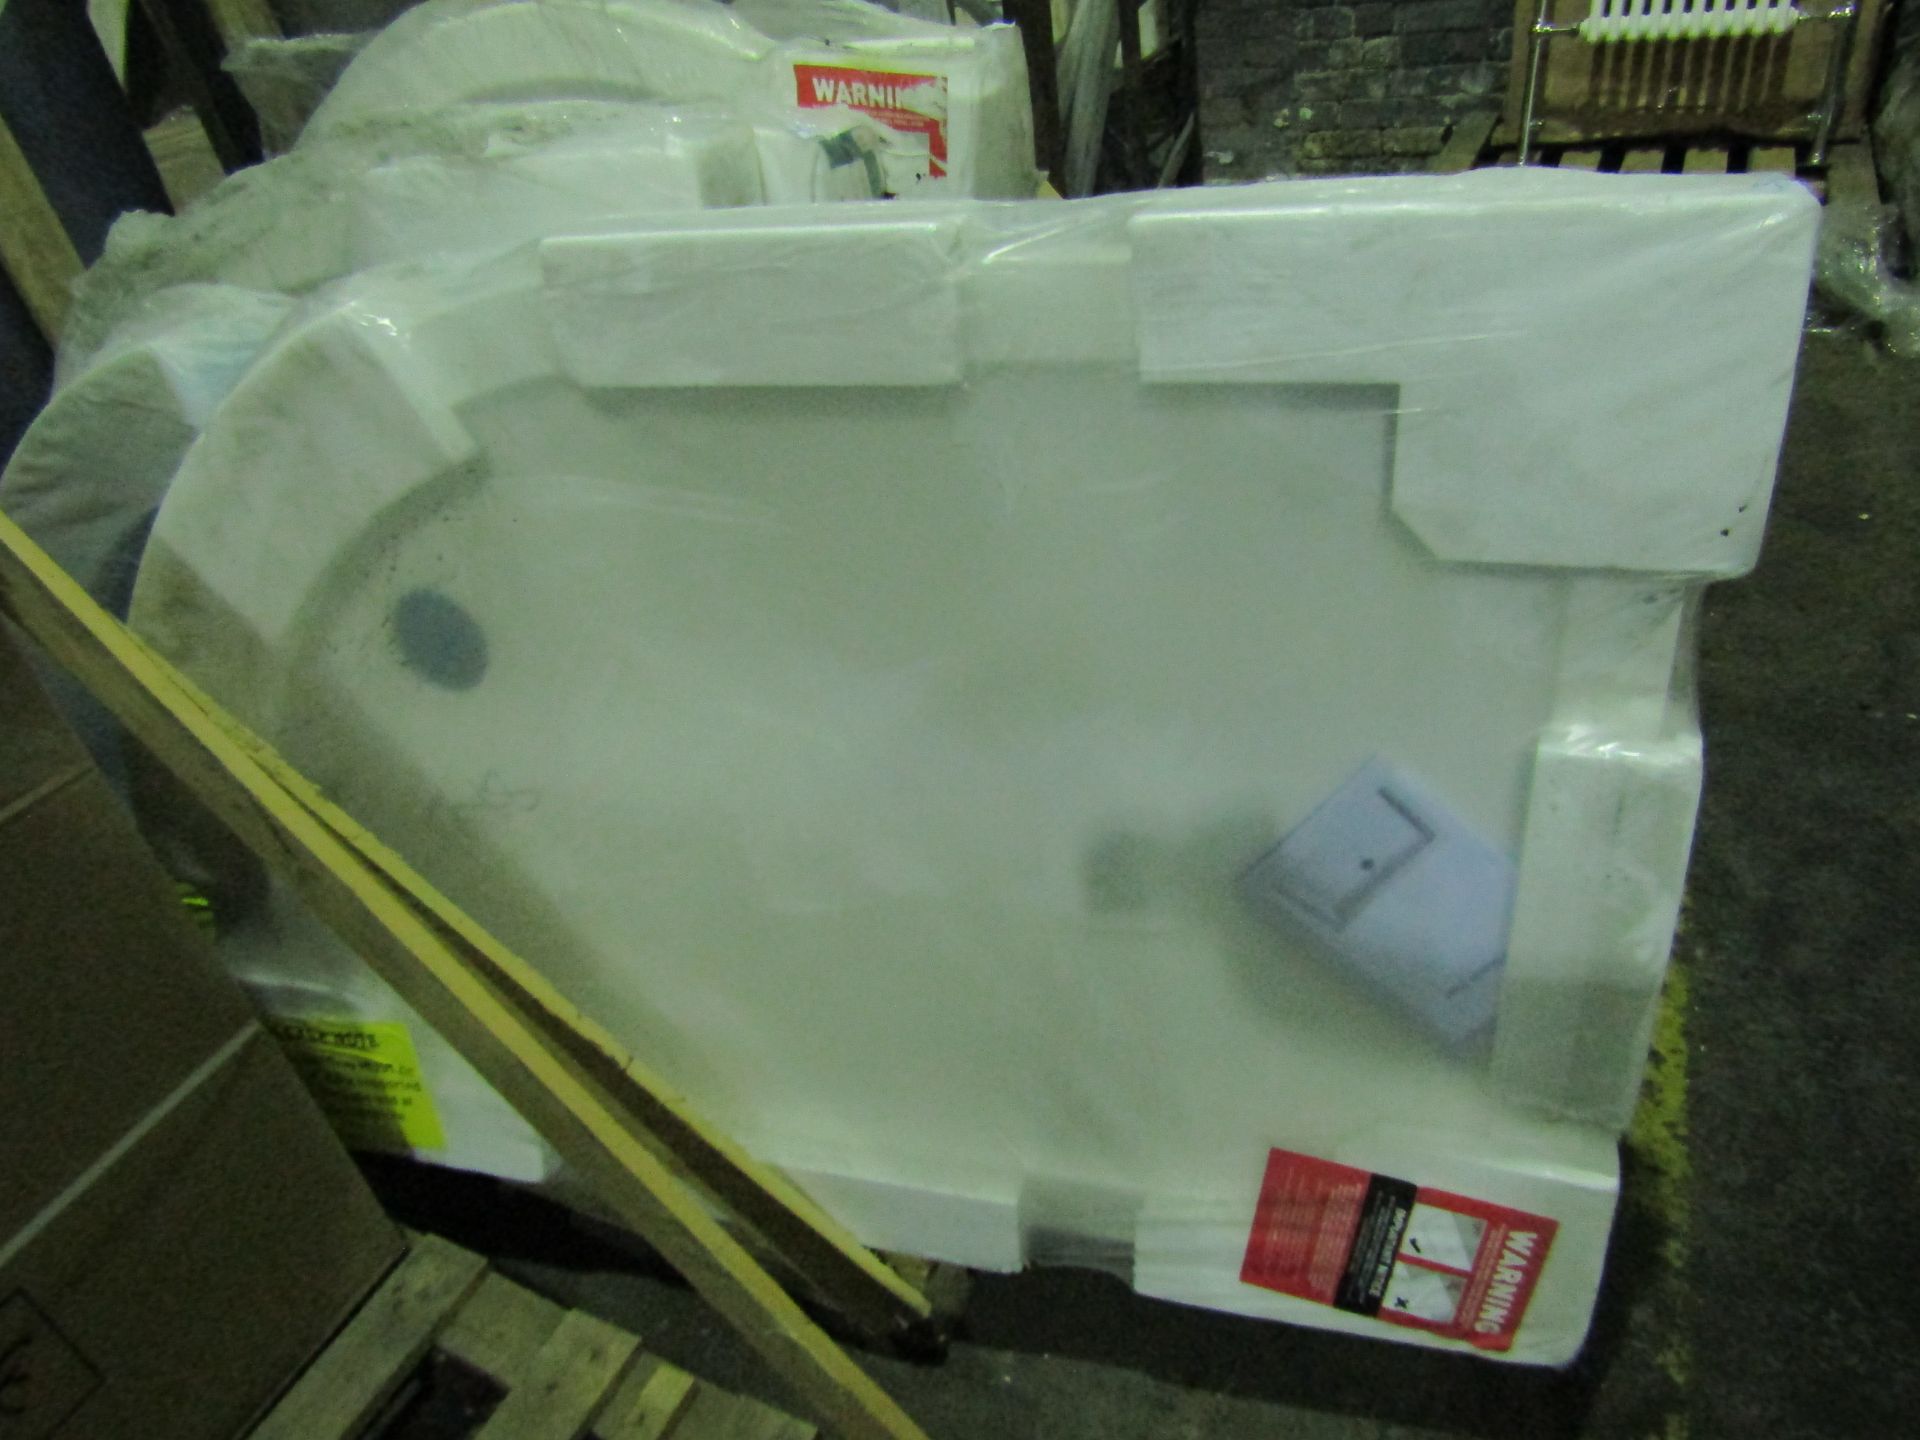 JT Ultra Cast - Right-Handed Quad White Shower Tray - 1200x800mm - Unused & Packaged.